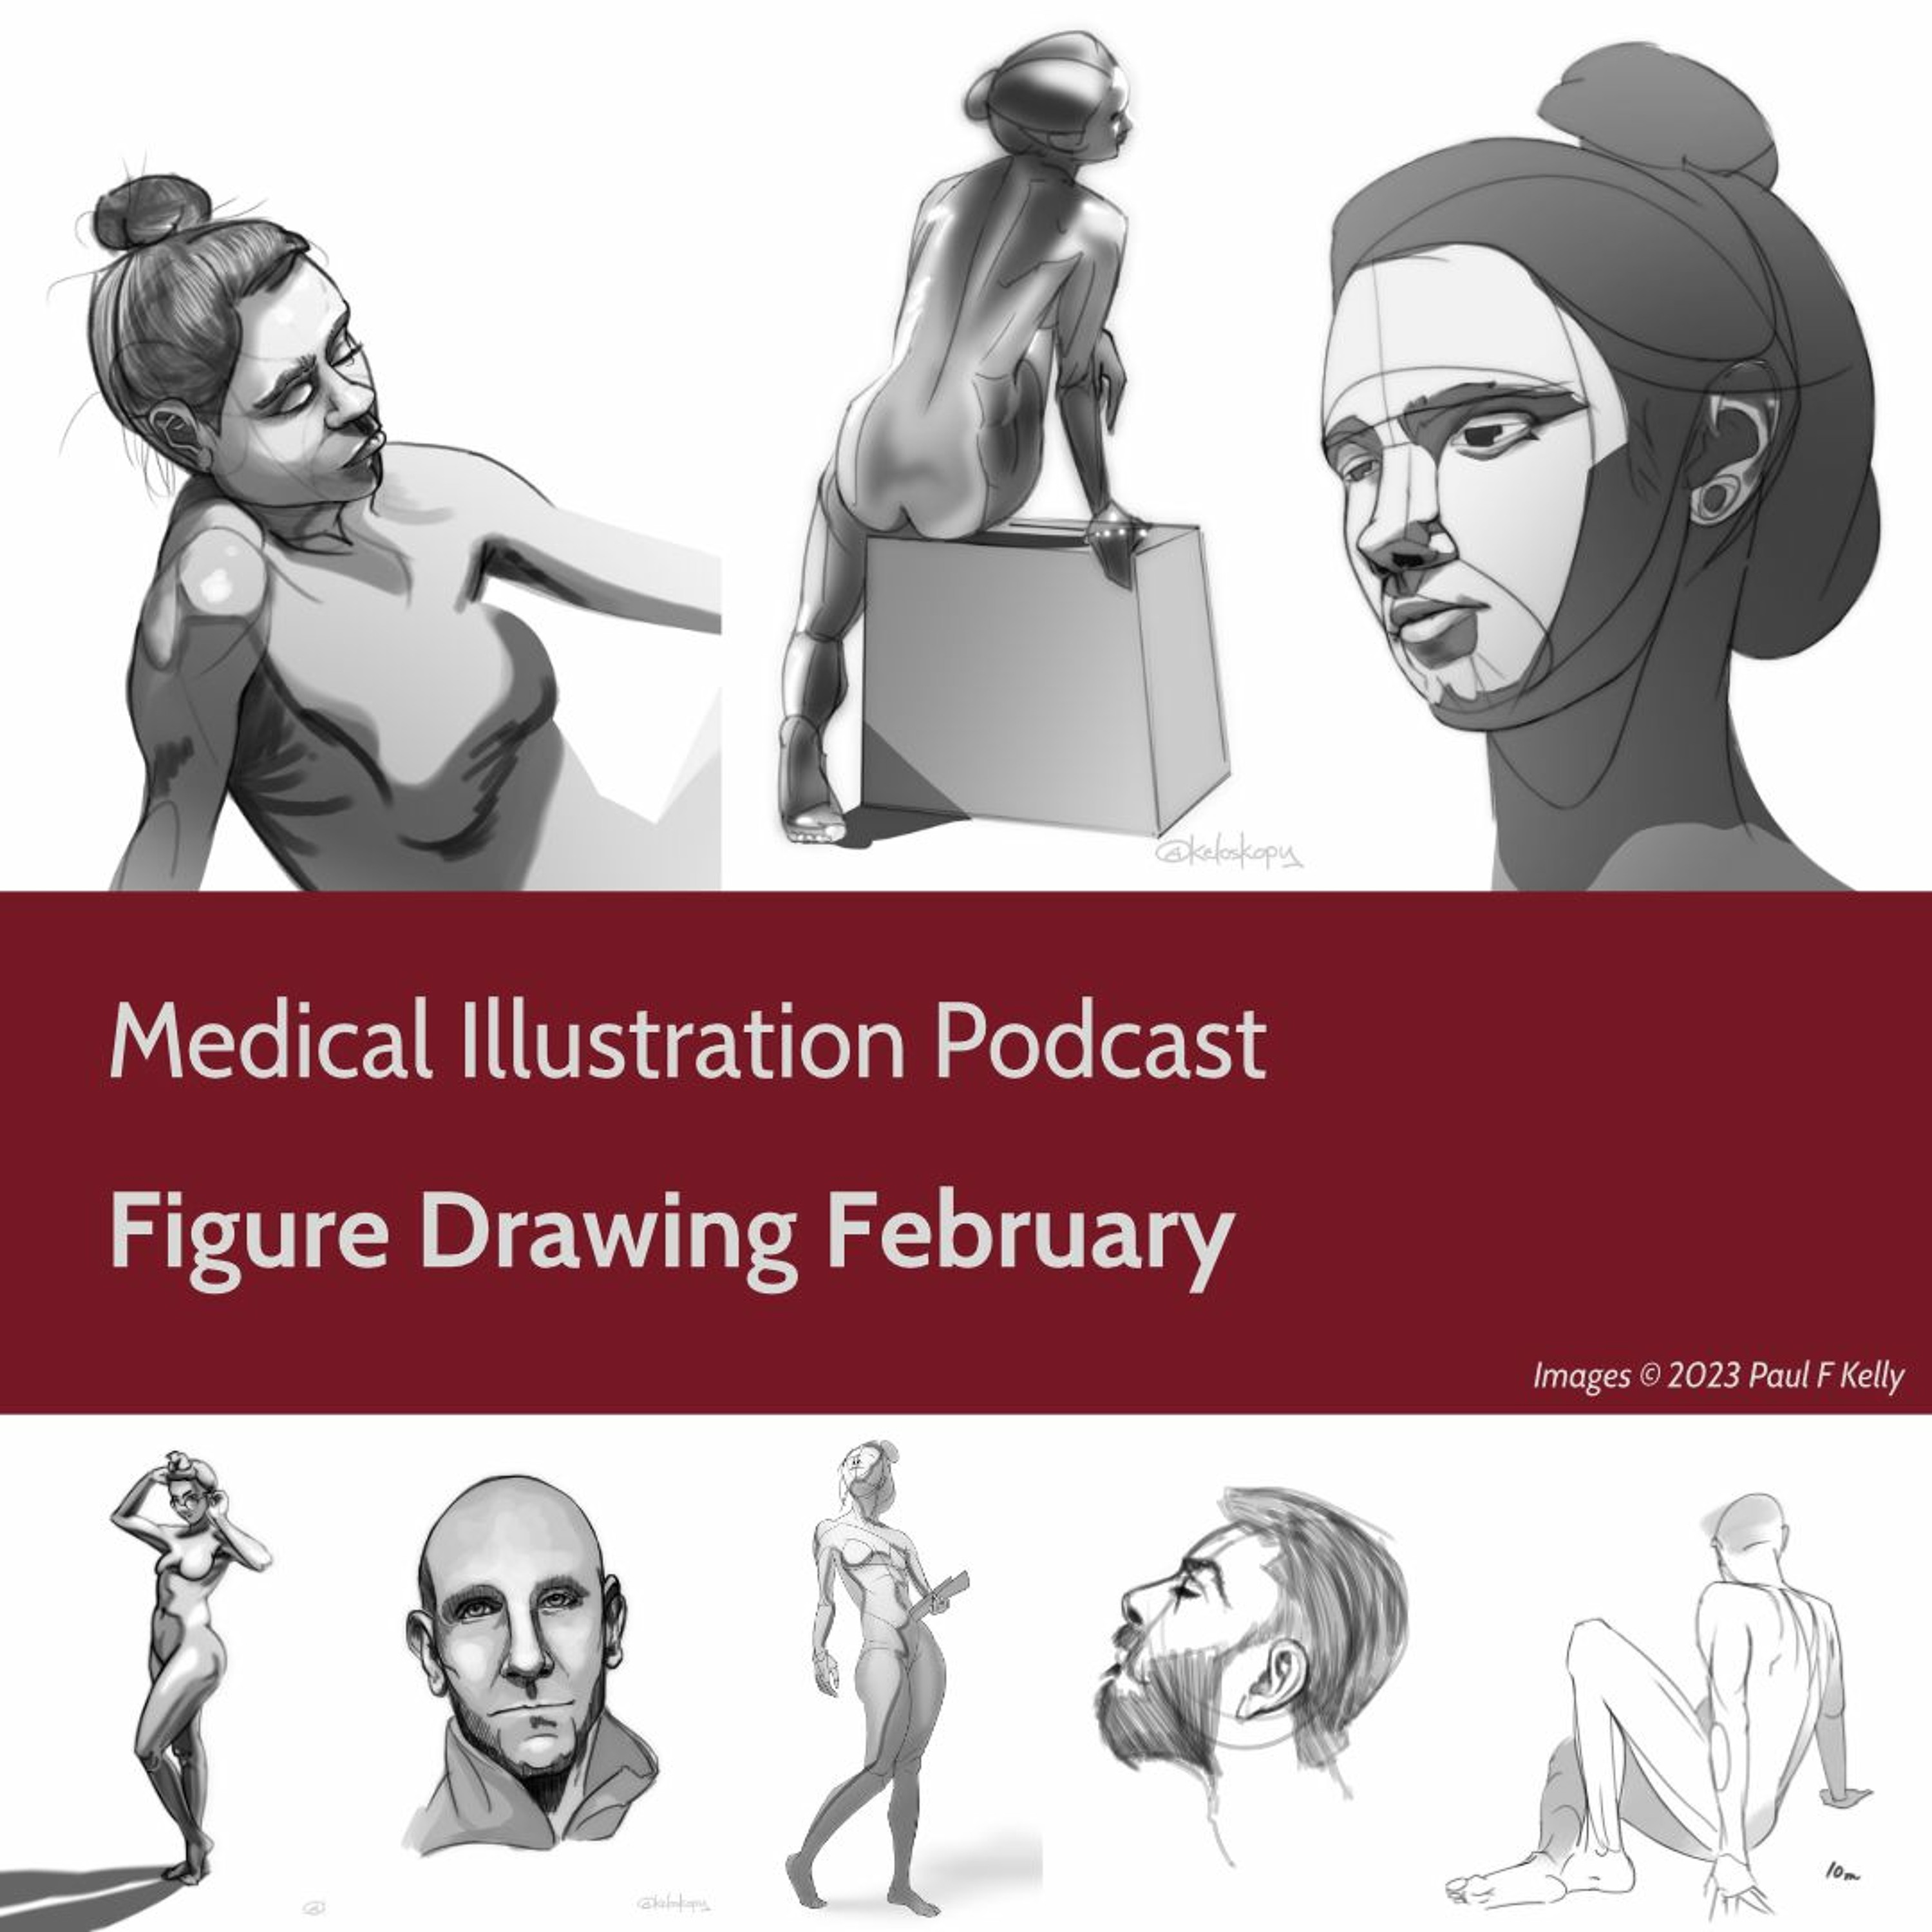 Figure drawing book recommendations